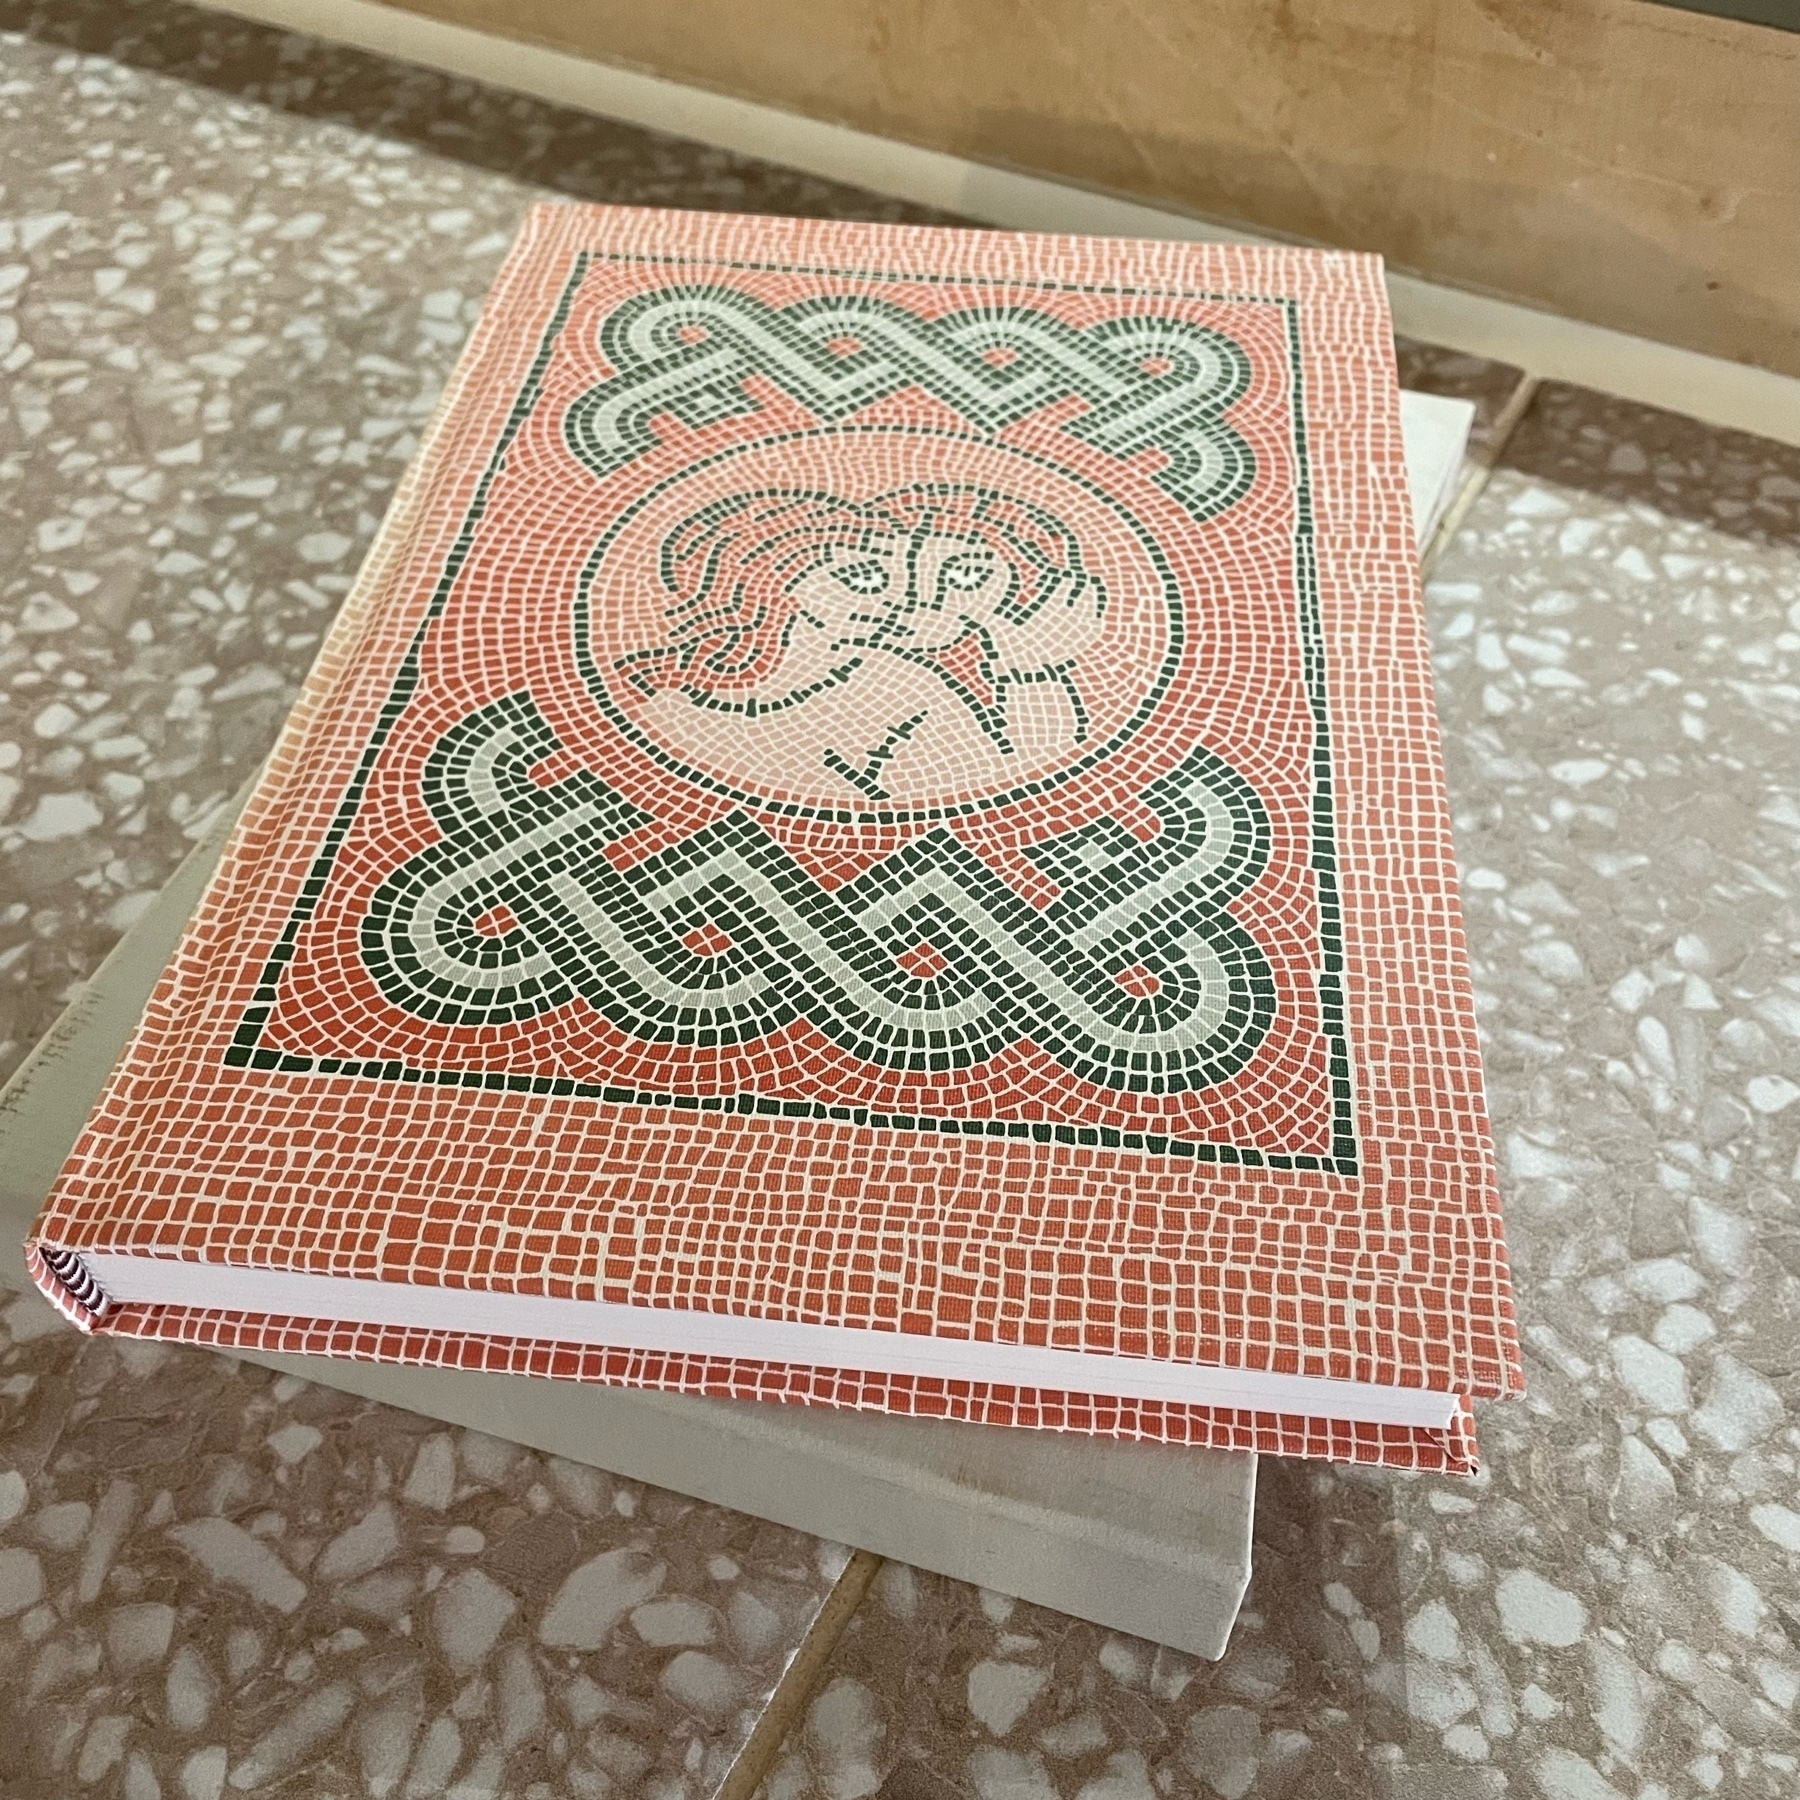 Hardback book with cover in the form of a full red and green mosaic showing two figurative lovers. Book sits atop a plain cream coloured cardboard sleeve. 